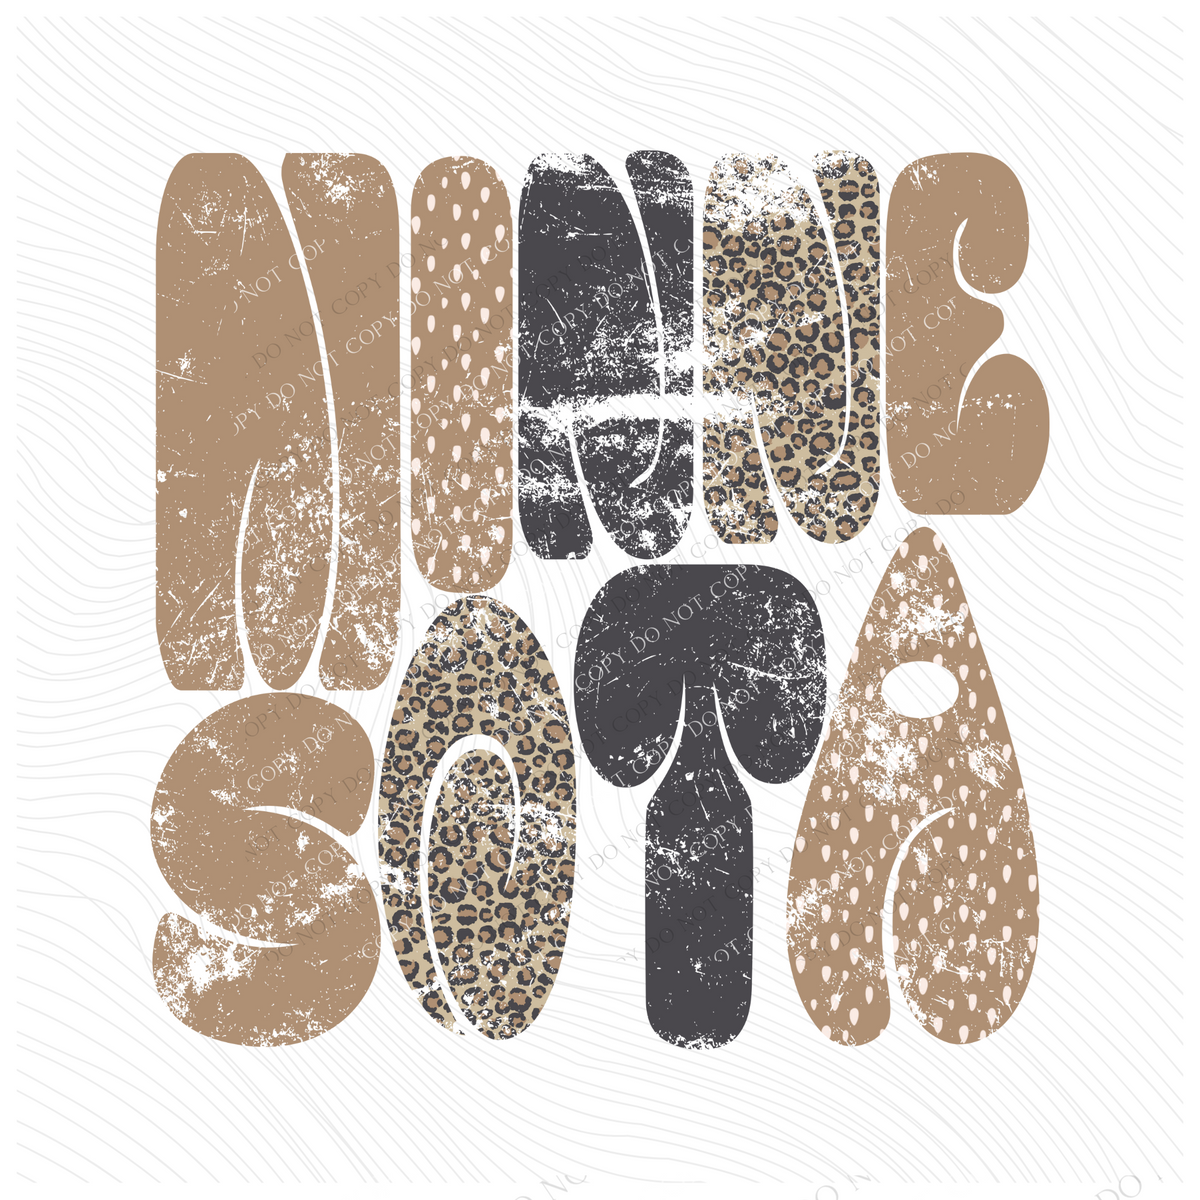 Minnesota Chubby Retro Distressed Leopard print in tones of Tans & Faded Black Digital Design, PNG